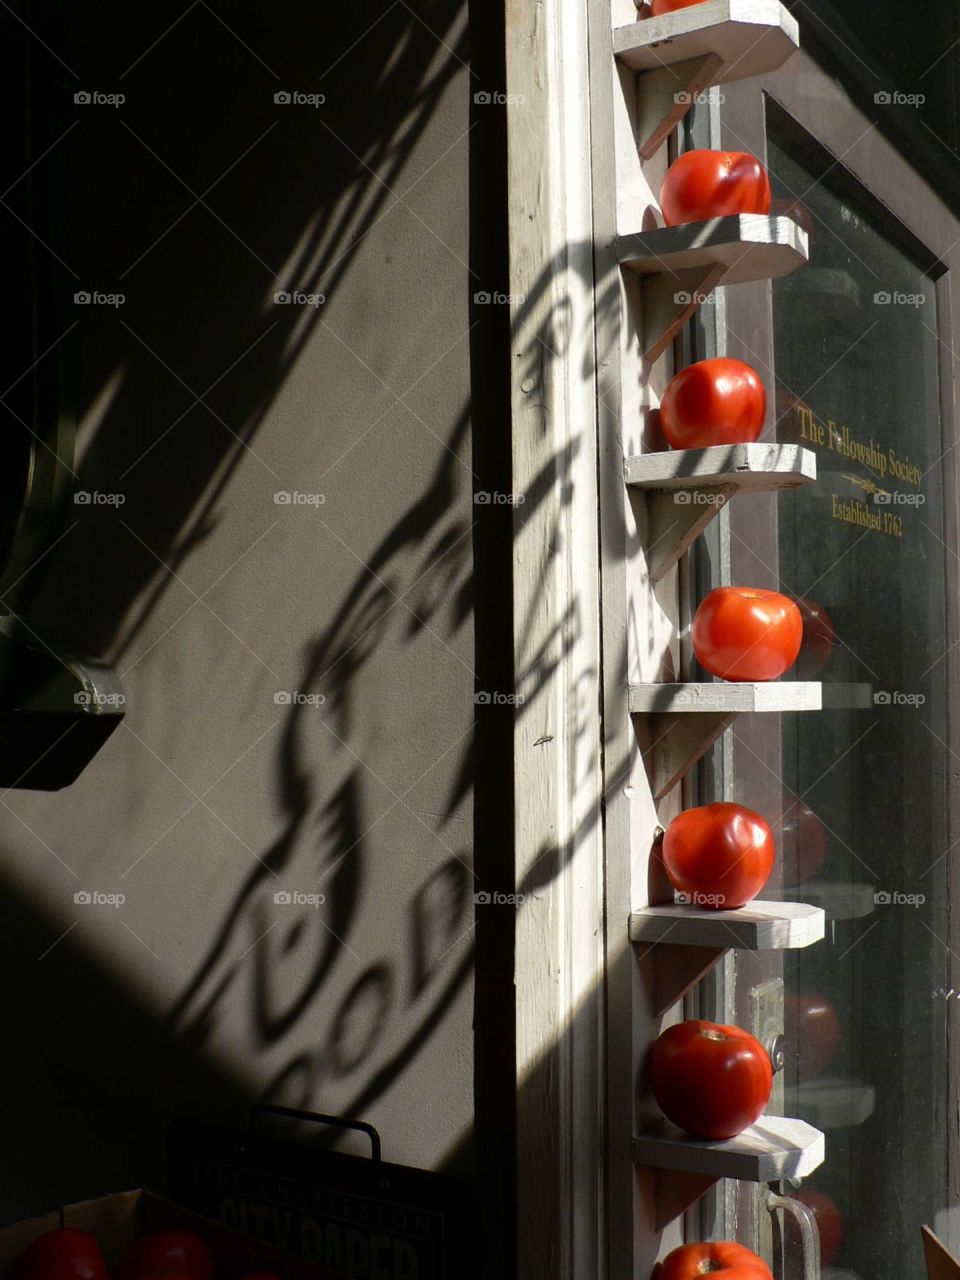 Some tomatoes!. Tomatoes in a store window South Carolina